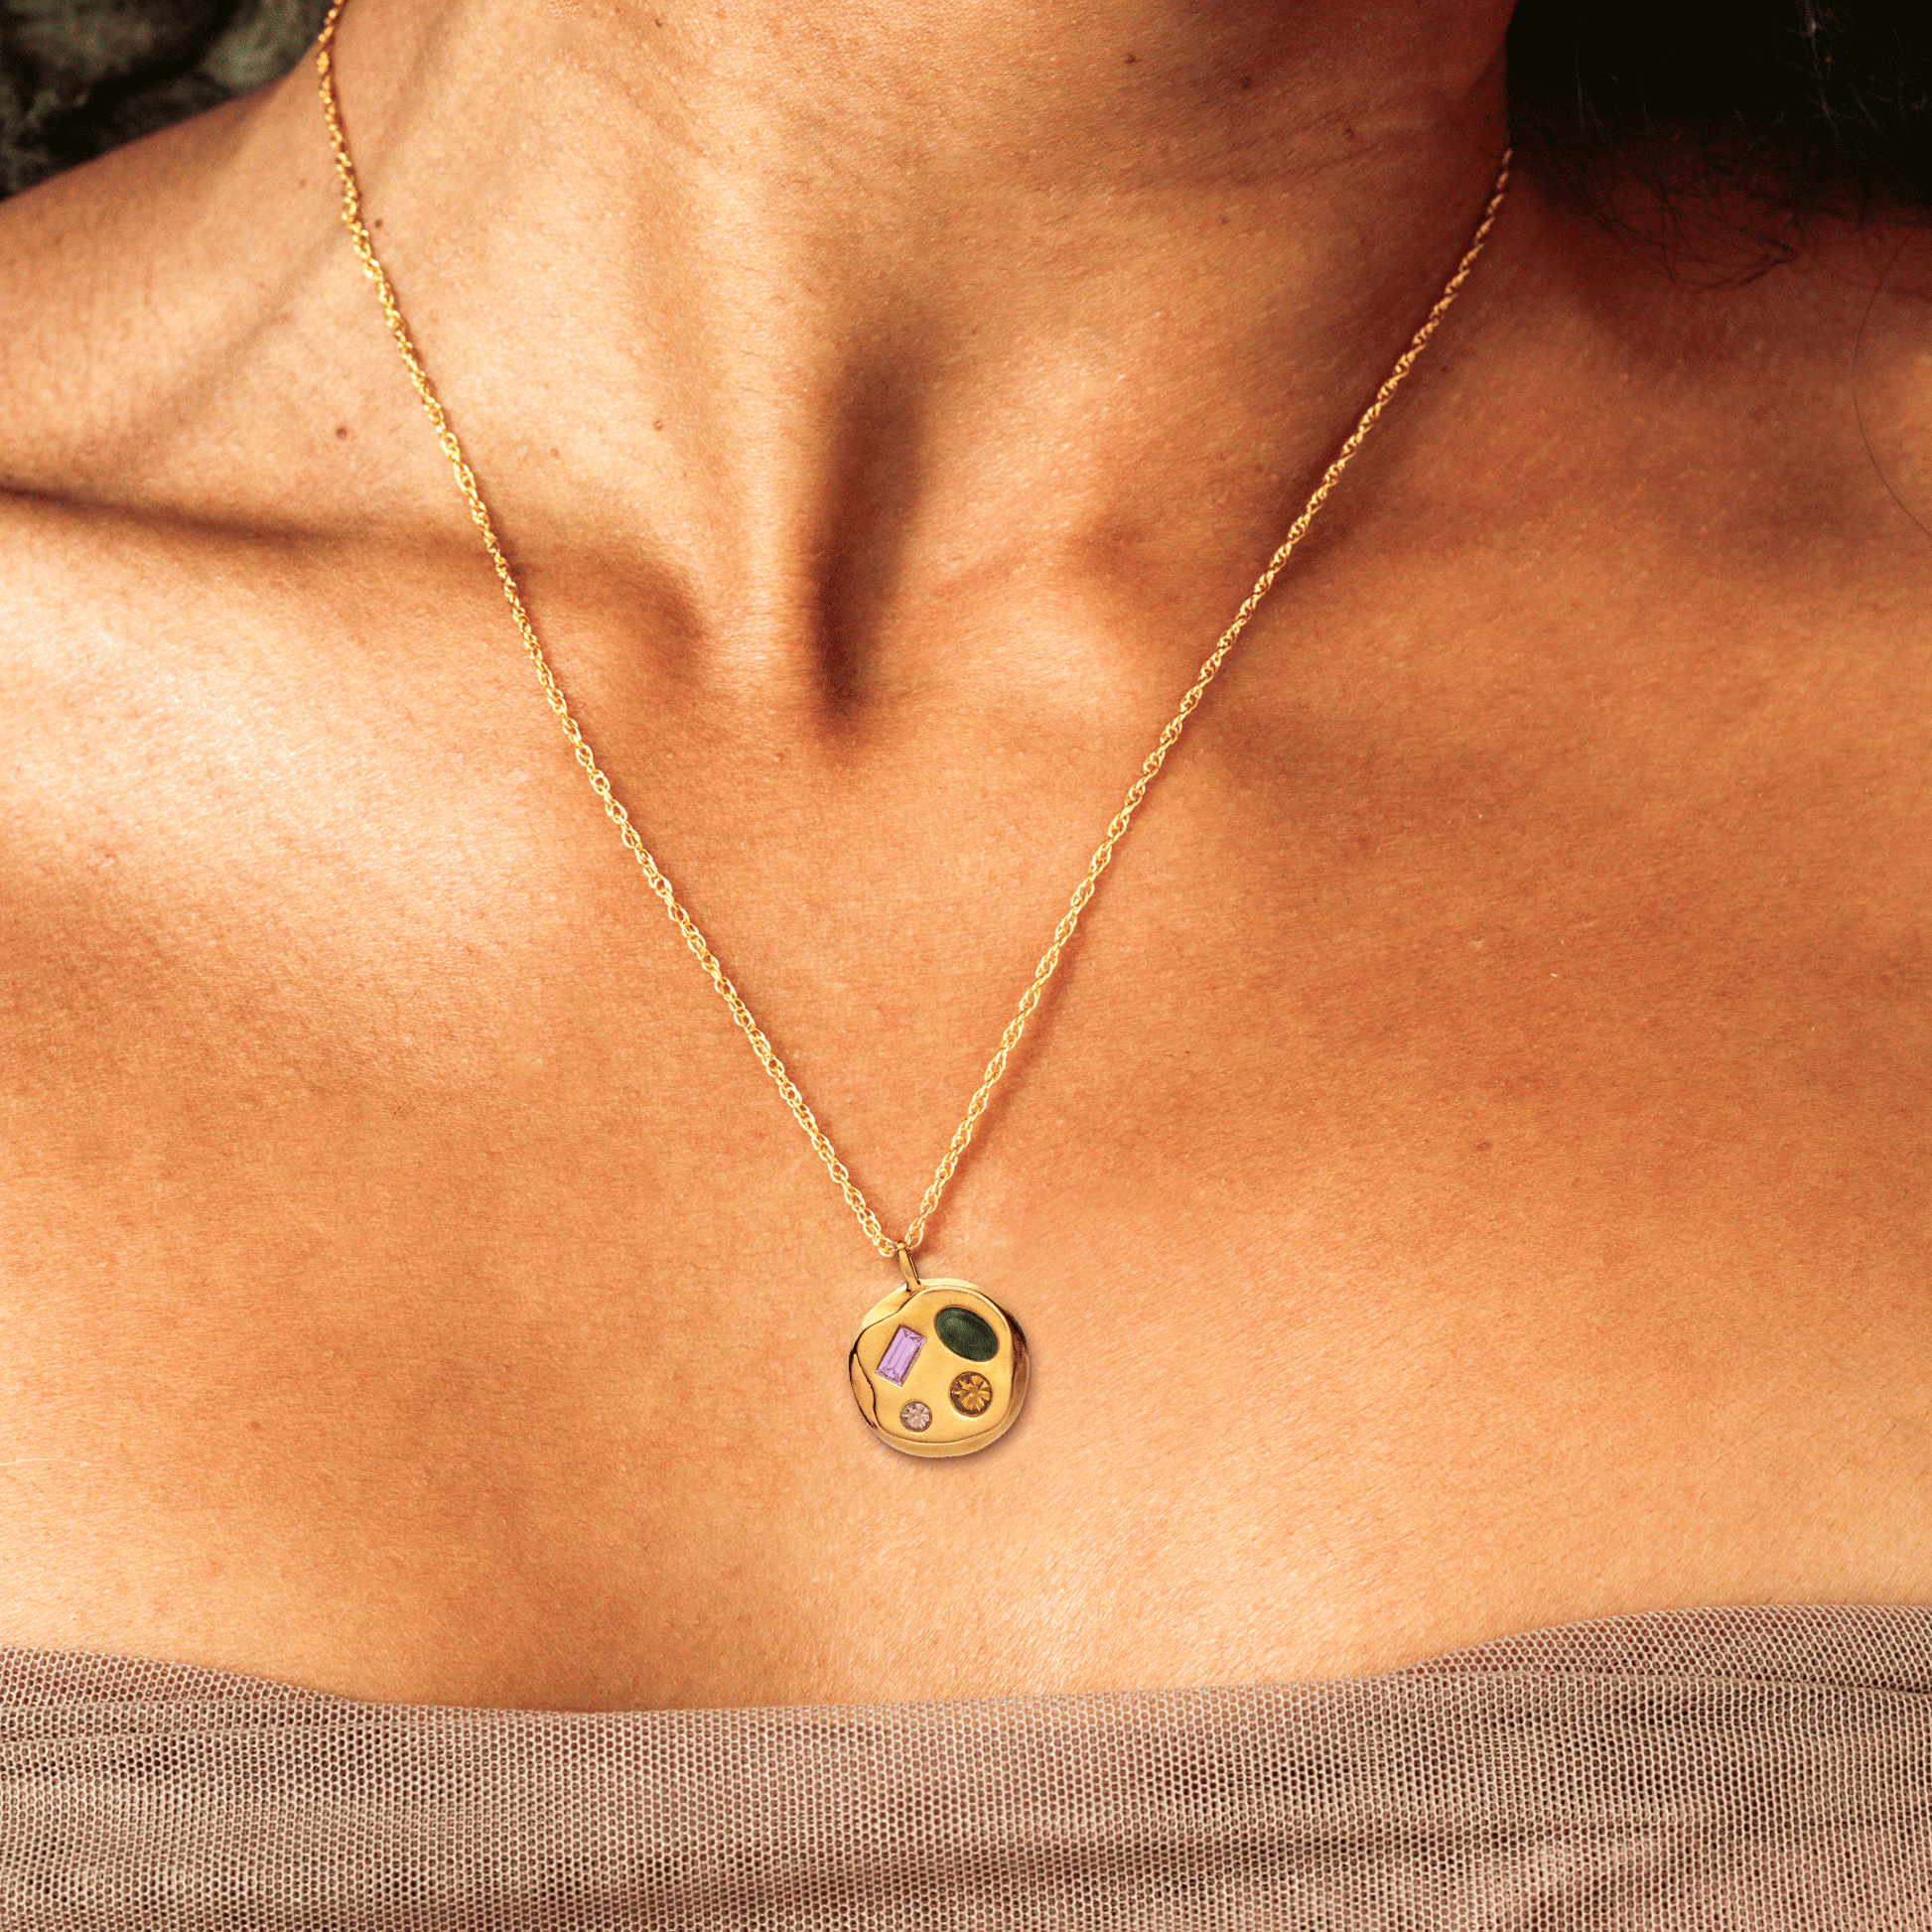 Person wearing The June Sixth Pendant